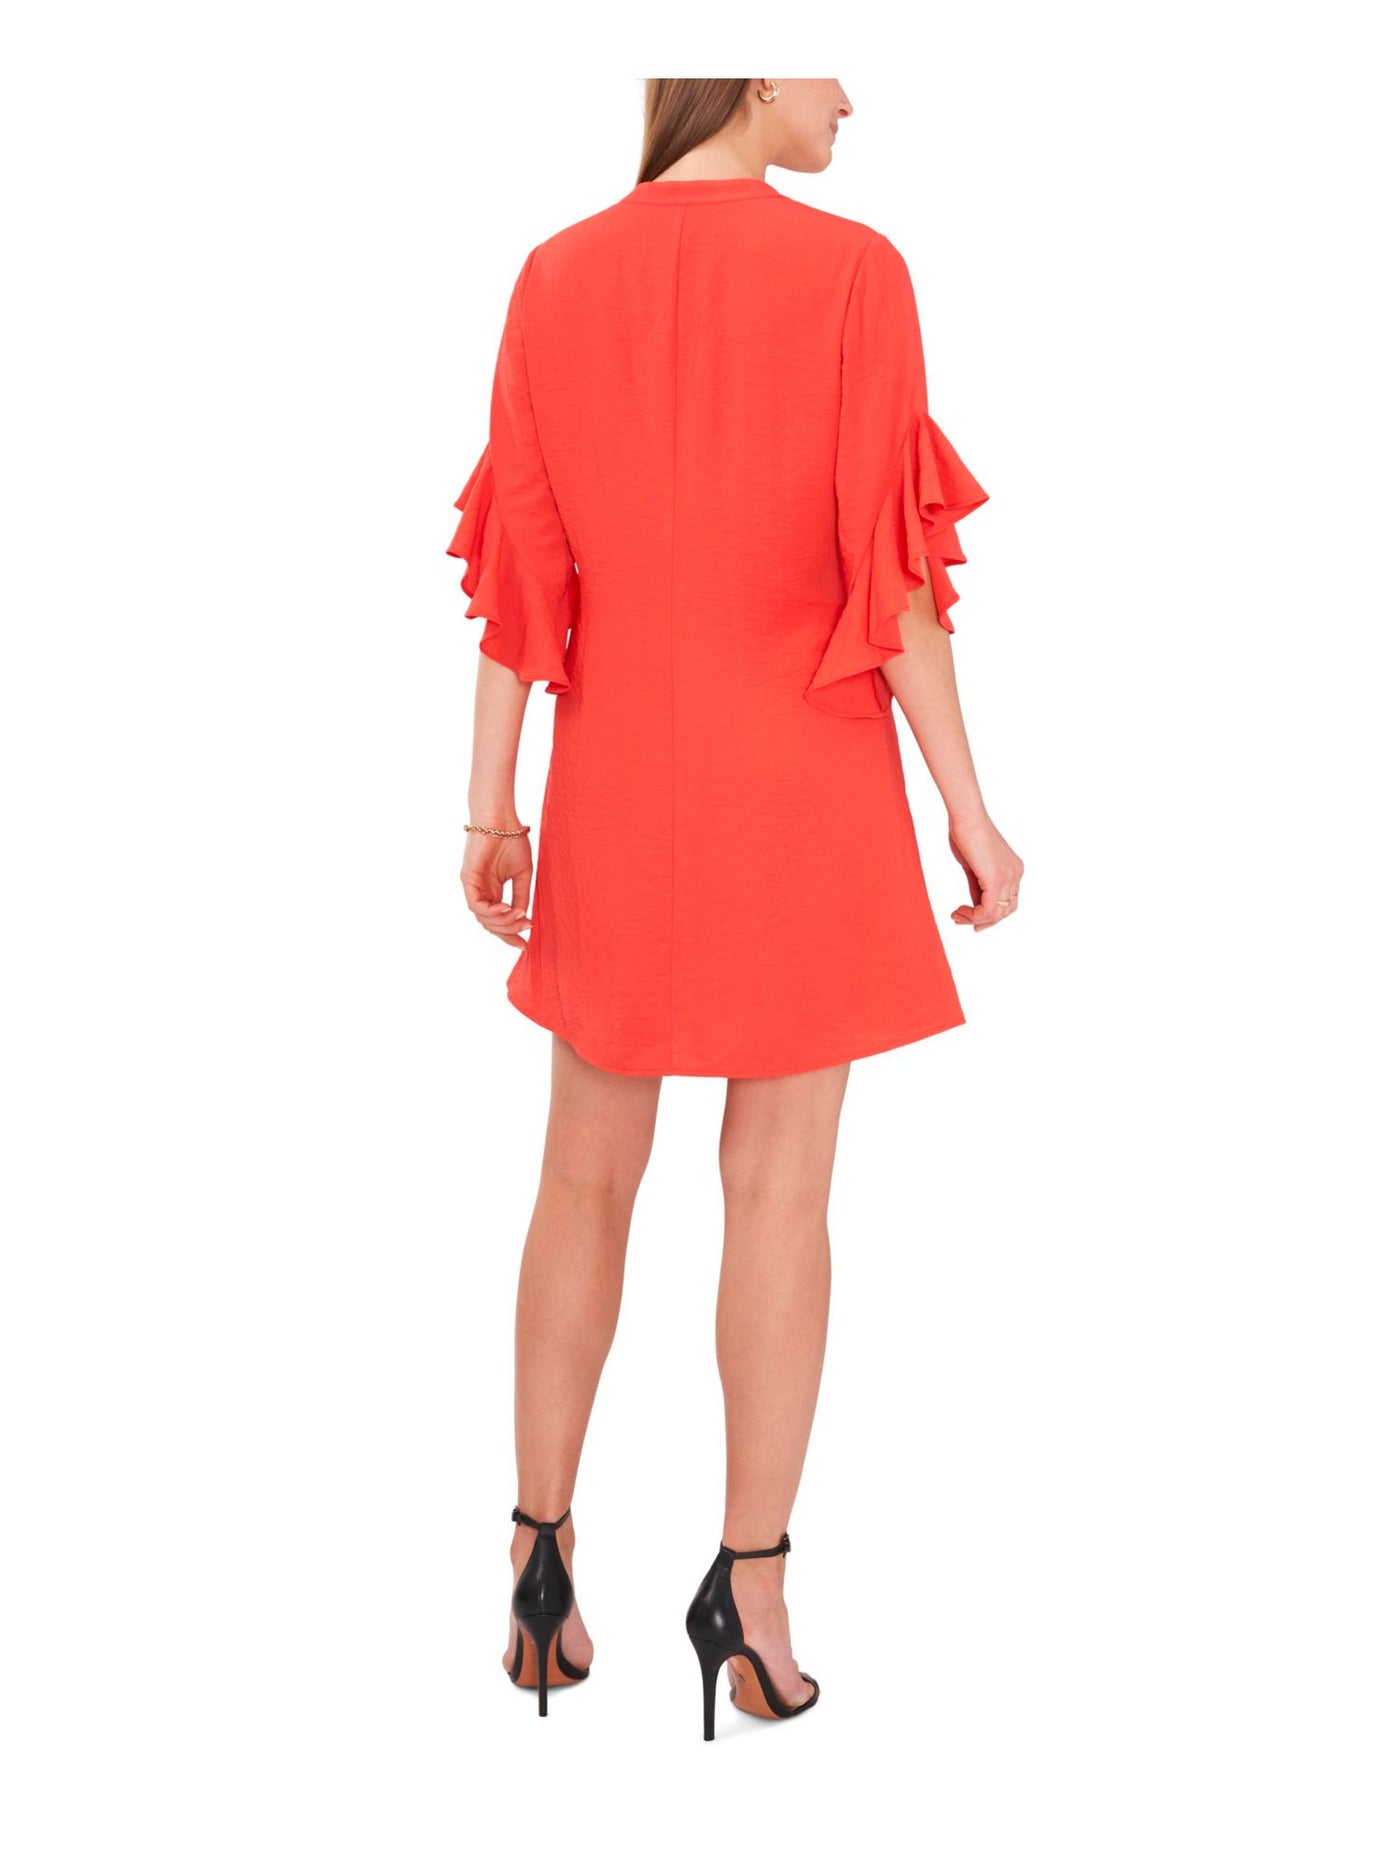 VINCE CAMUTO Womens Coral Ruffled Pintucked Pullover 3/4 Sleeve Split Above The Knee Wear To Work Fit + Flare Dress M